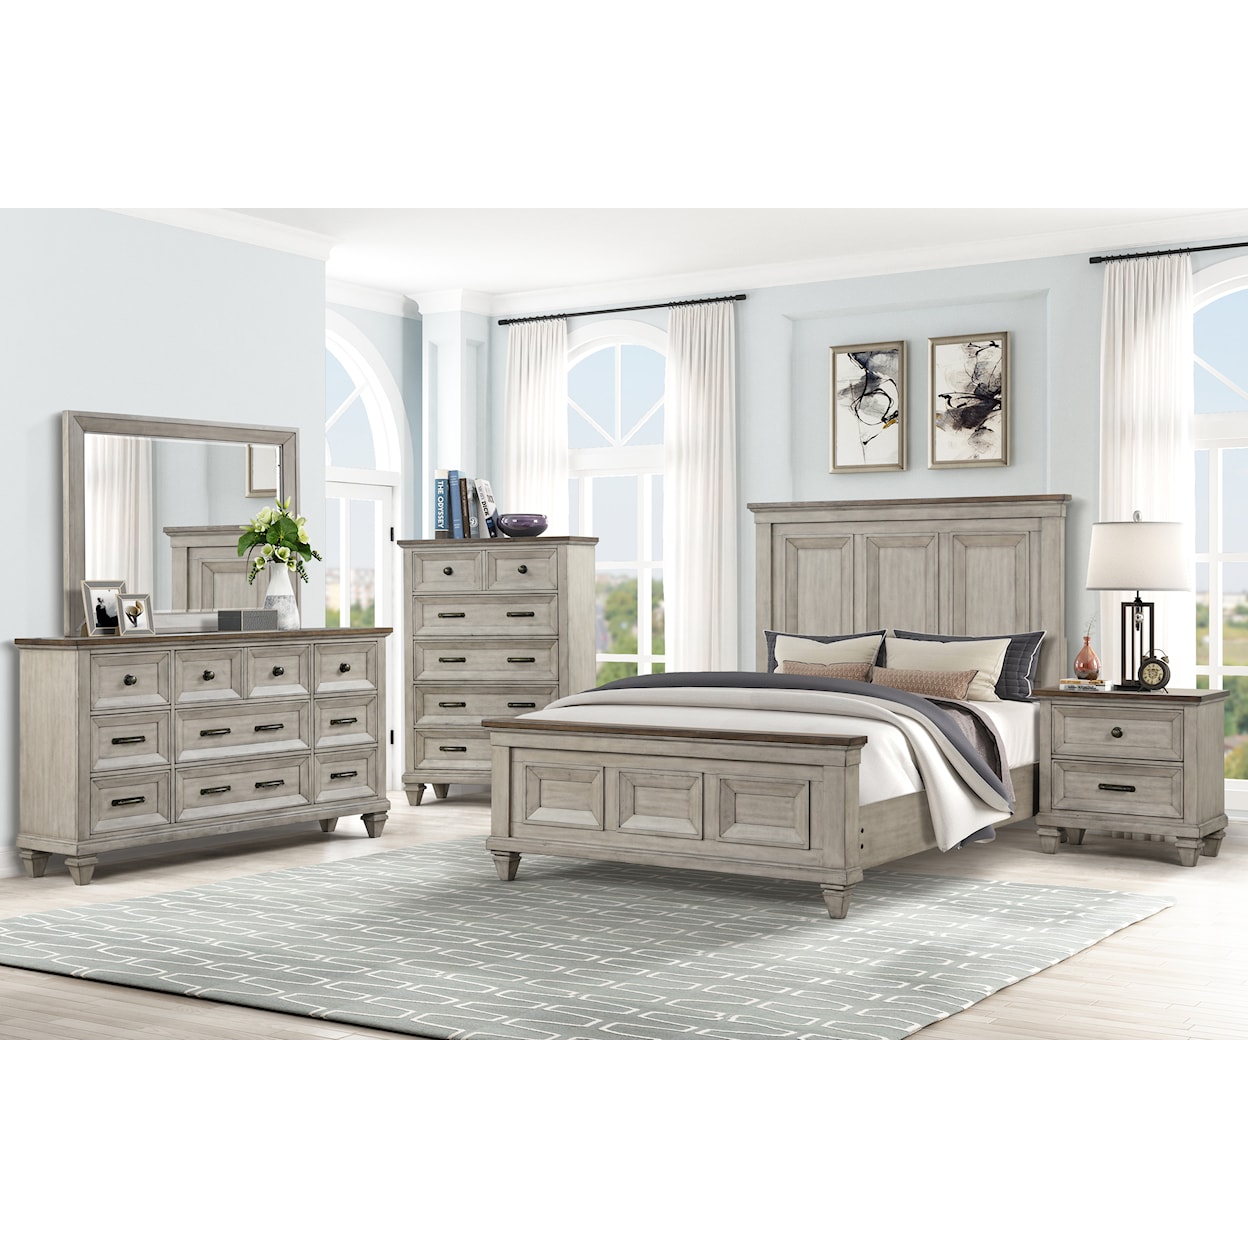 New Classic Furniture Mariana King Panel Bed